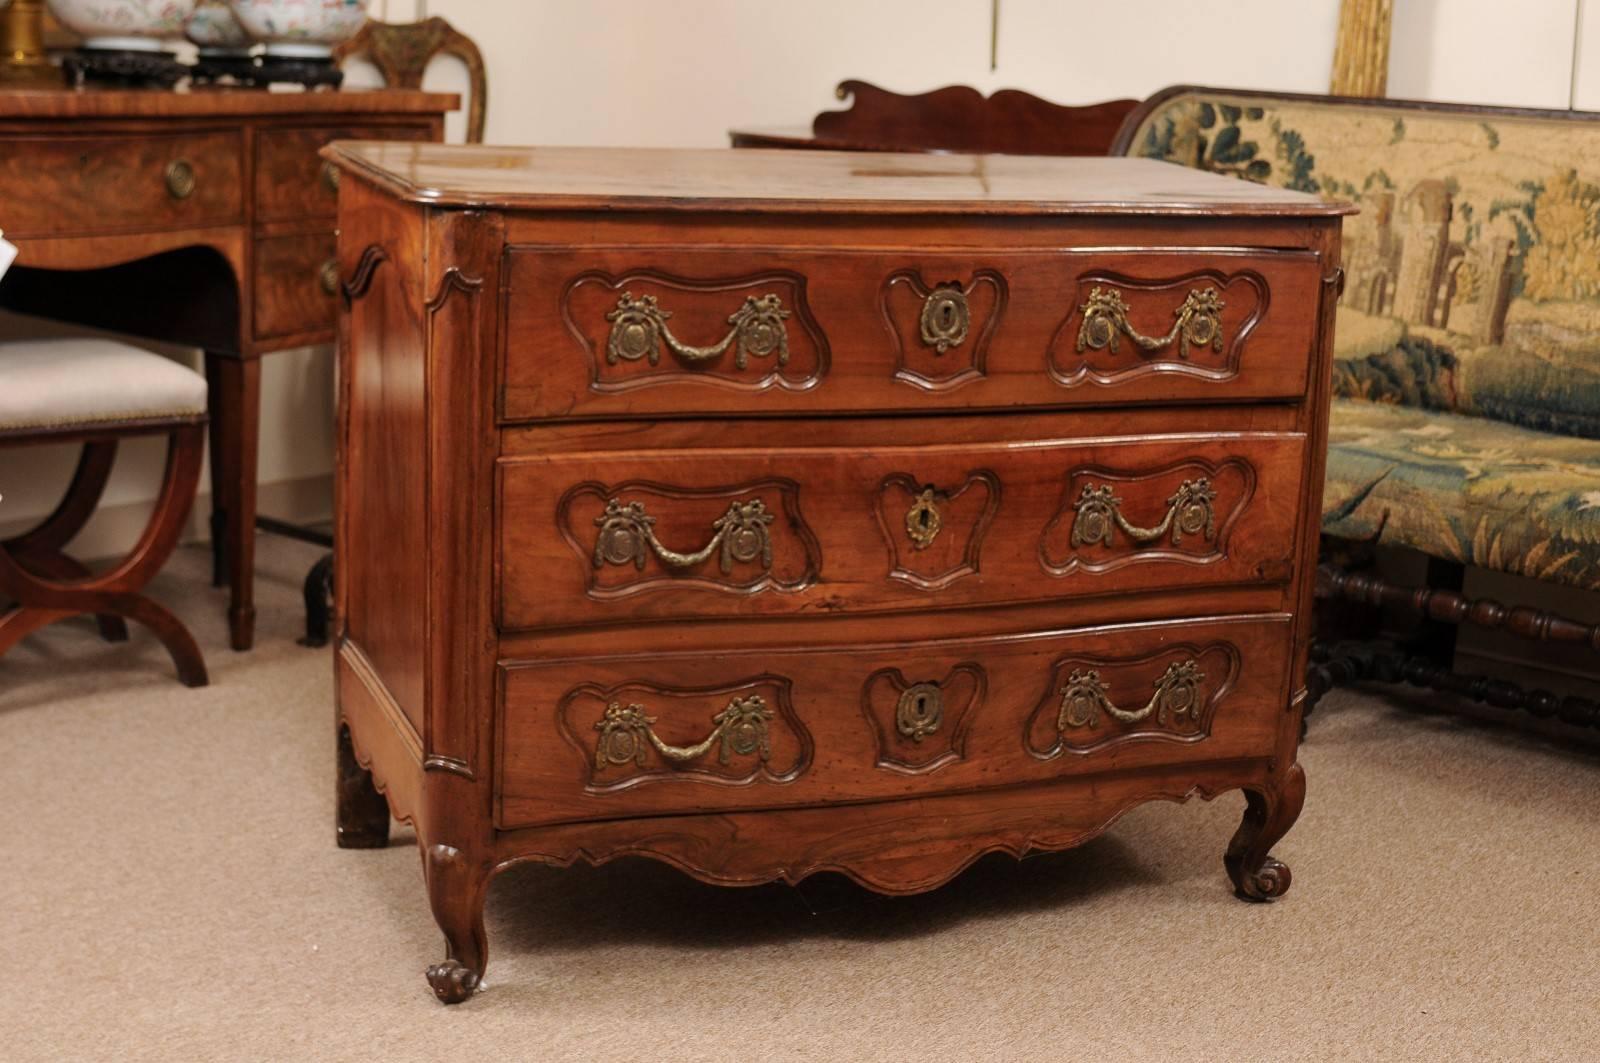 Mid-18th century French Louis XV period 3-drawer commode in walnut on cabriole feet.